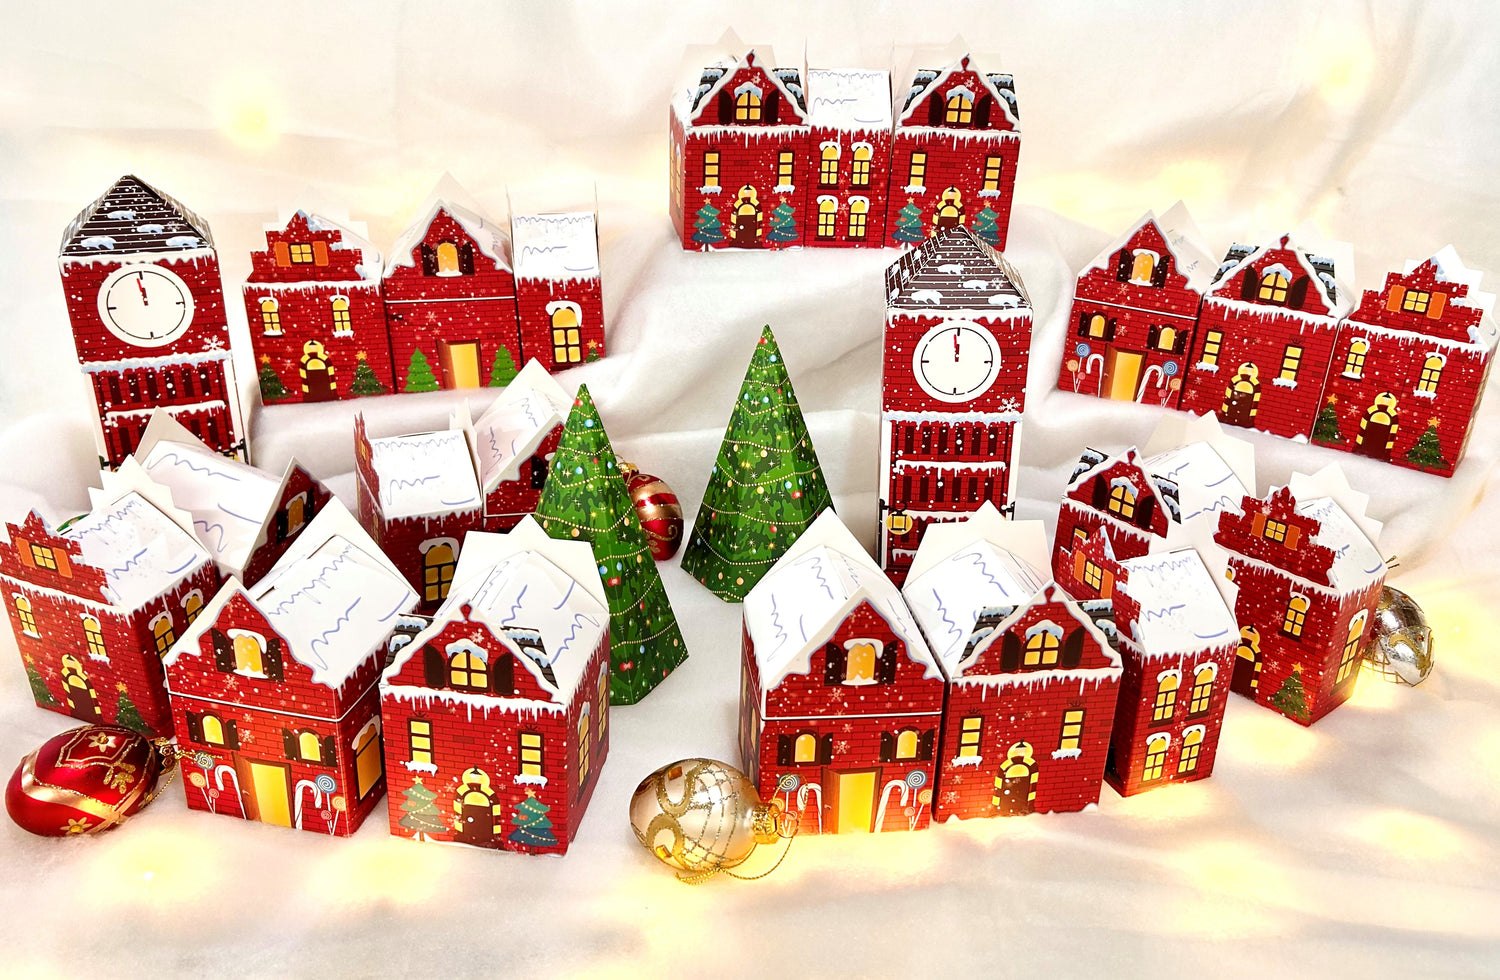 PRE-ORDER: Christmas Village Countdown 24 Days of Gifts